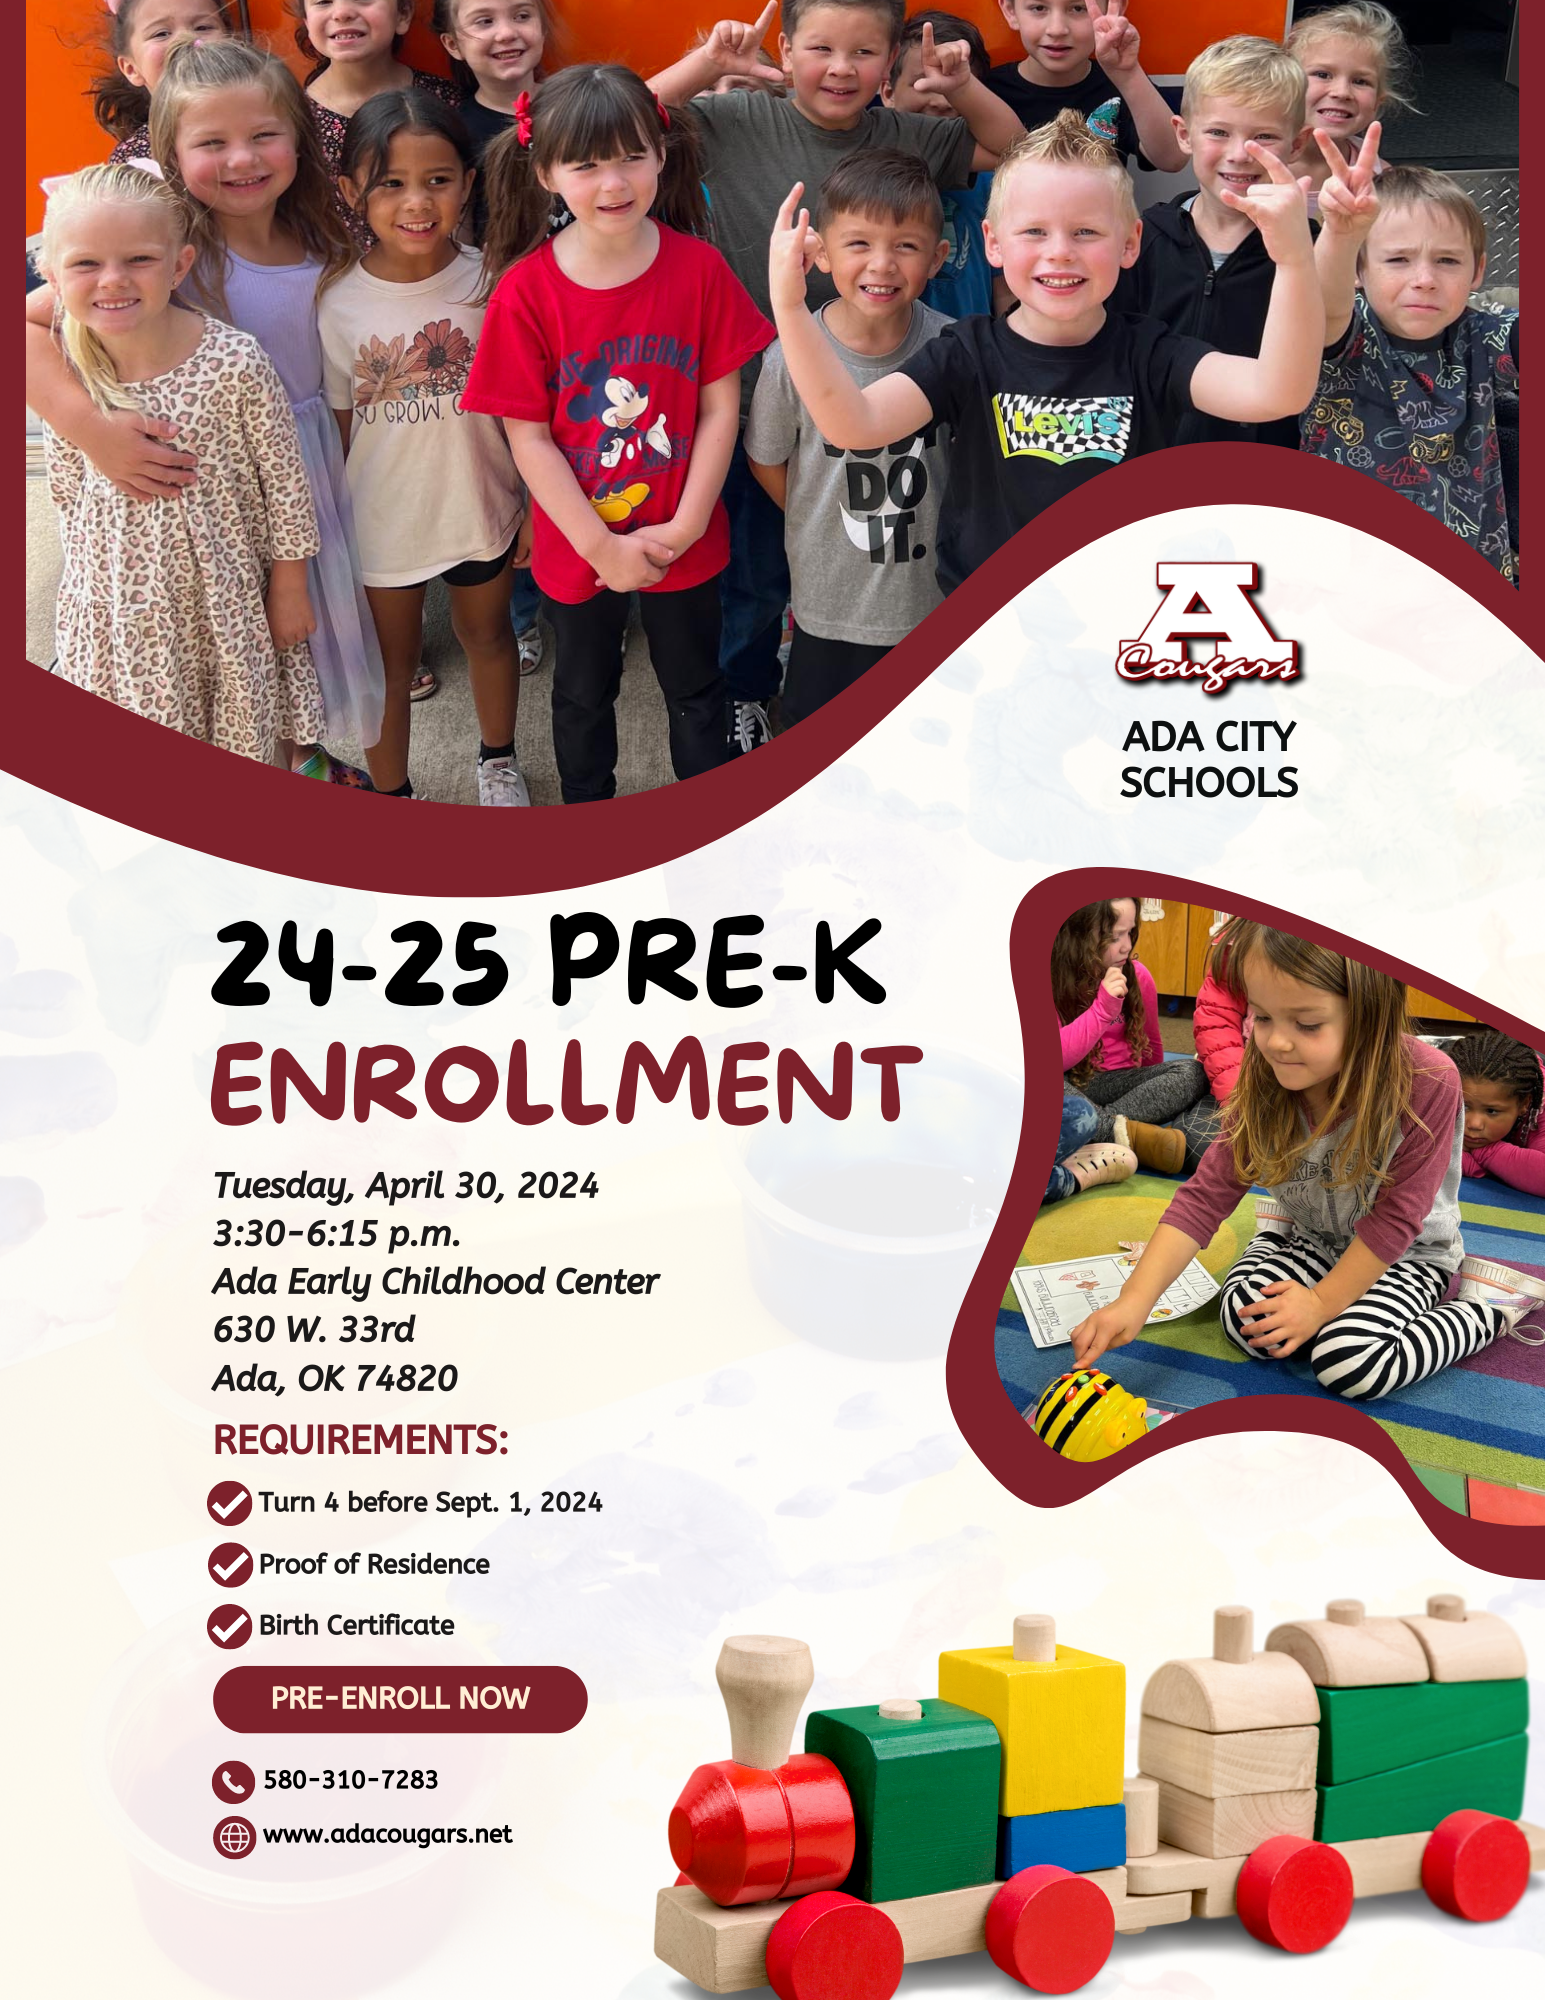 Ada City Schools will host a Pre-K enrollment event 3:30-6:15 p.m. Tuesday, April 30, at the Ada Early Childhood Center, 630 W. 33rd St., in Ada.   For the 2024-25 school year, students must be 4 years old by Sept. 1, 2024. Parents or guardians must bring proof of residence and birth certificate for pre-enrollment.   At the event, parents and students can also tour the facilities.   For more information, call the Ada Early Childhood Center at 580-310-1238.